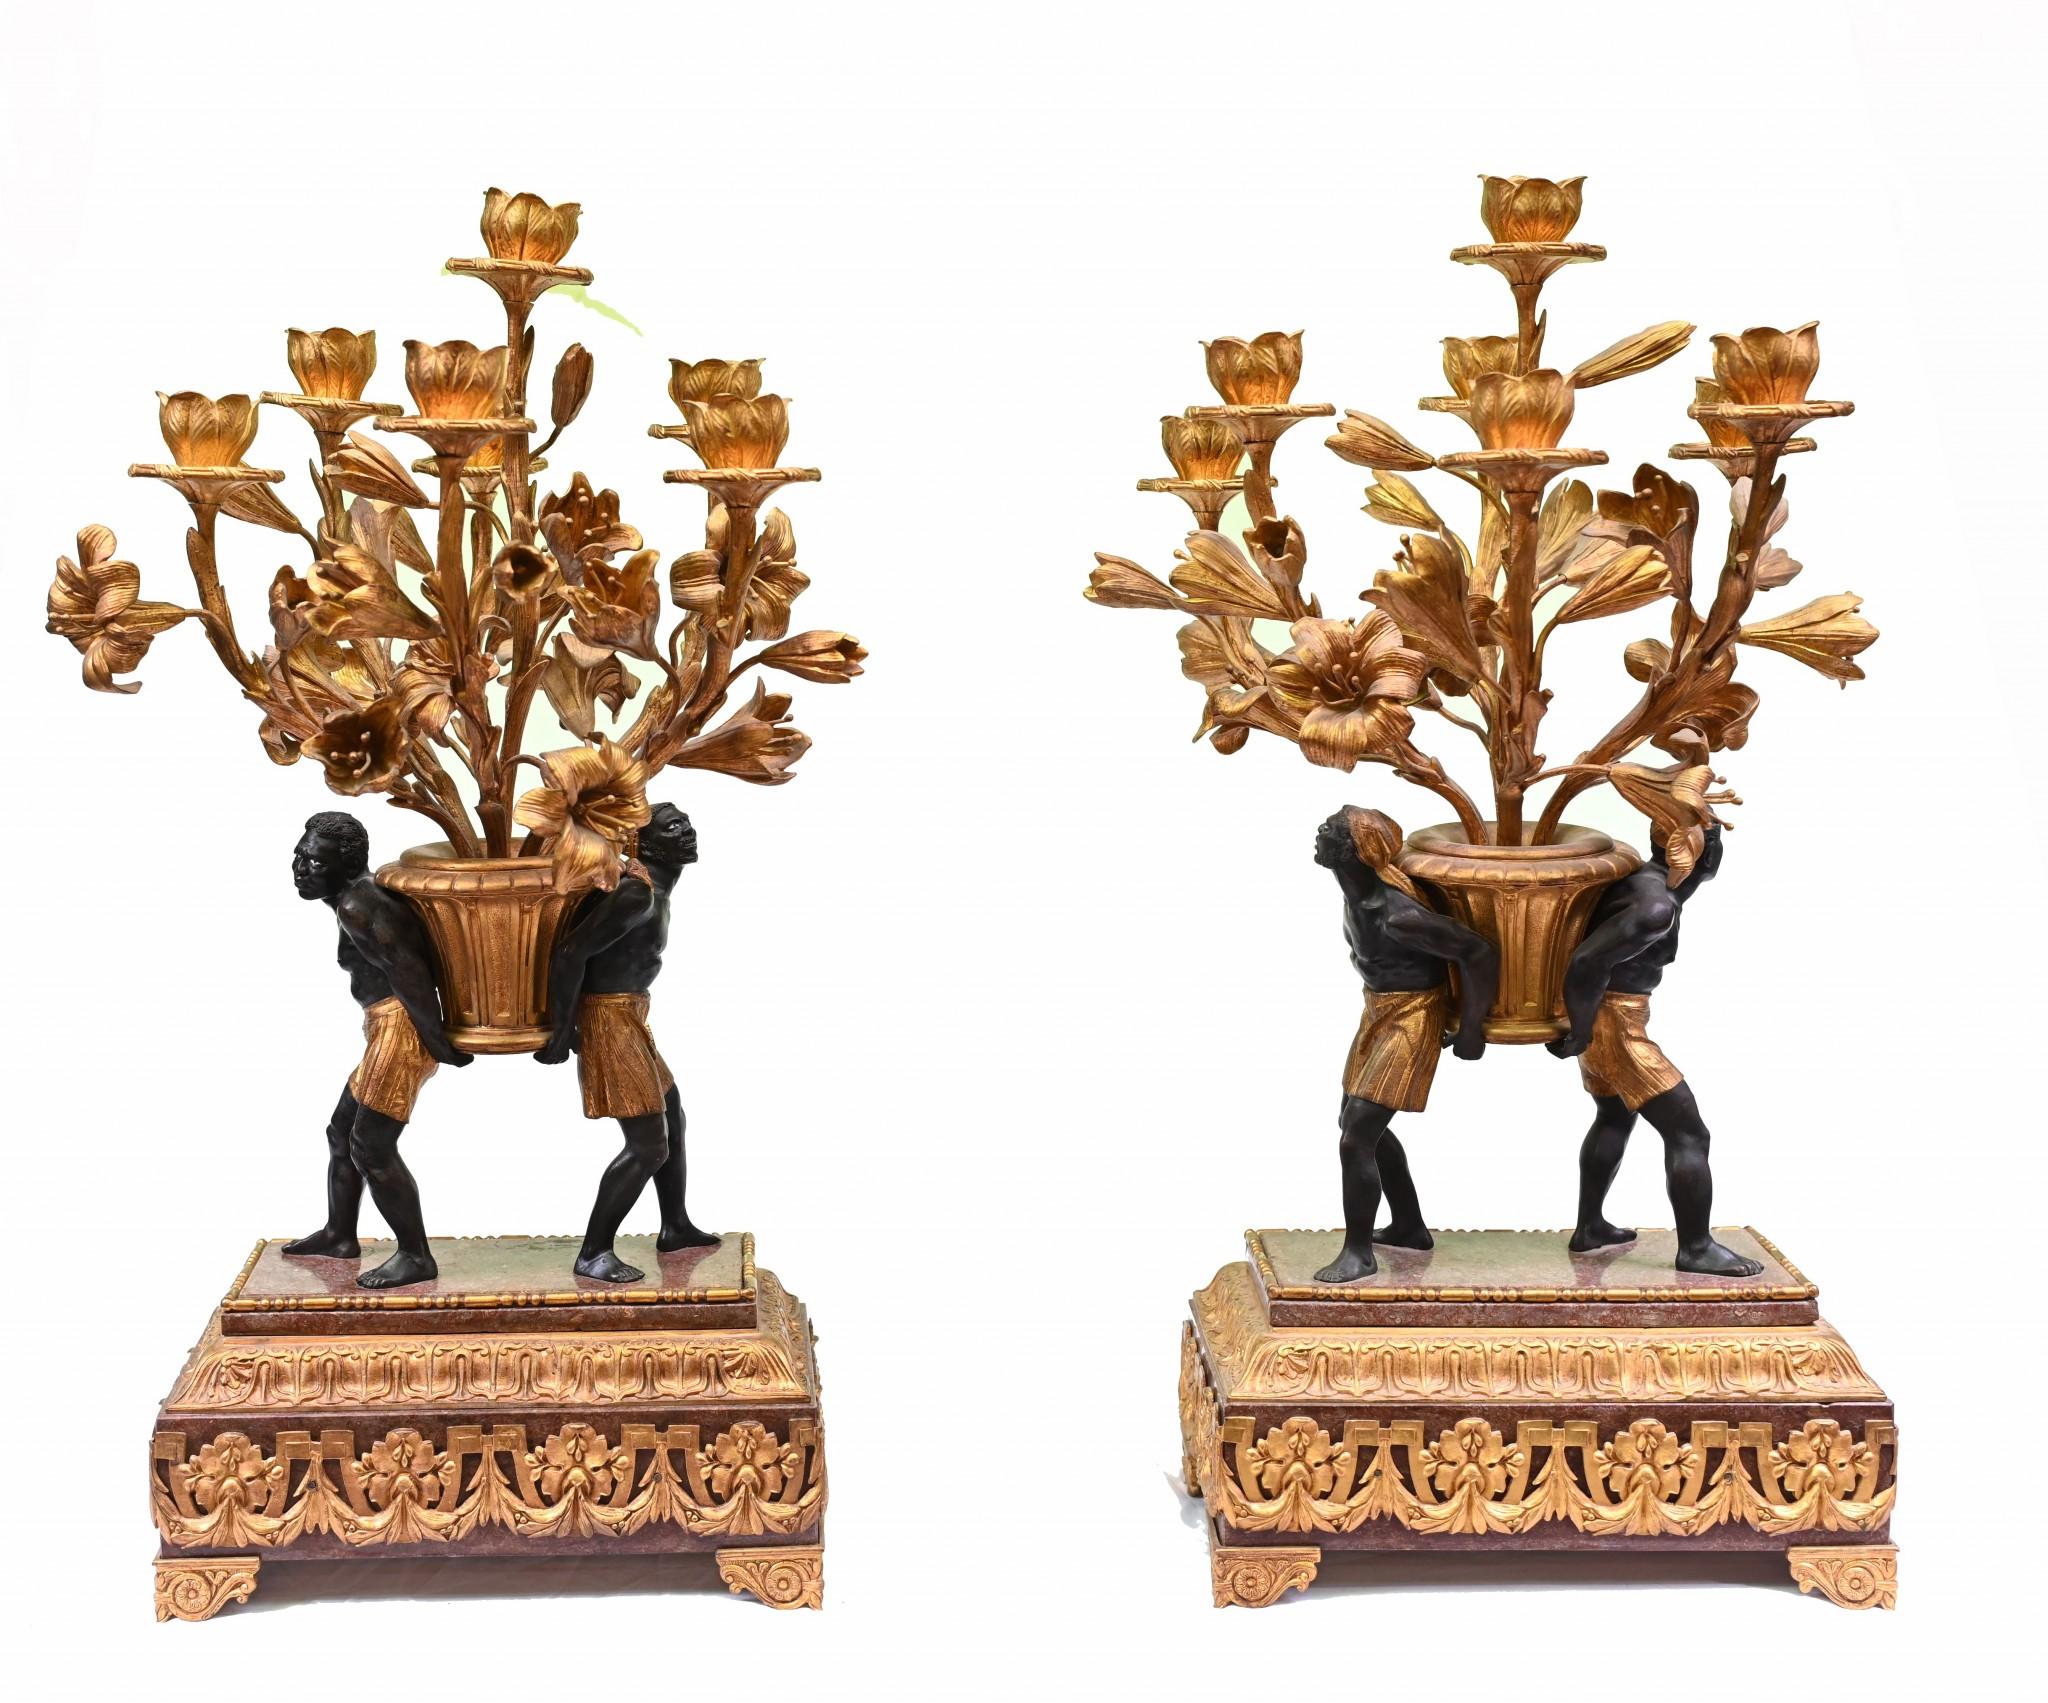 Elegant pair of blackamoor gilt candelabras from the Regency era
A pair of blackamoors to each stand holds aloft the candelabra branches which are interspersed with flowers
The casting is very ornate with a wonderful patina
Bought for a private